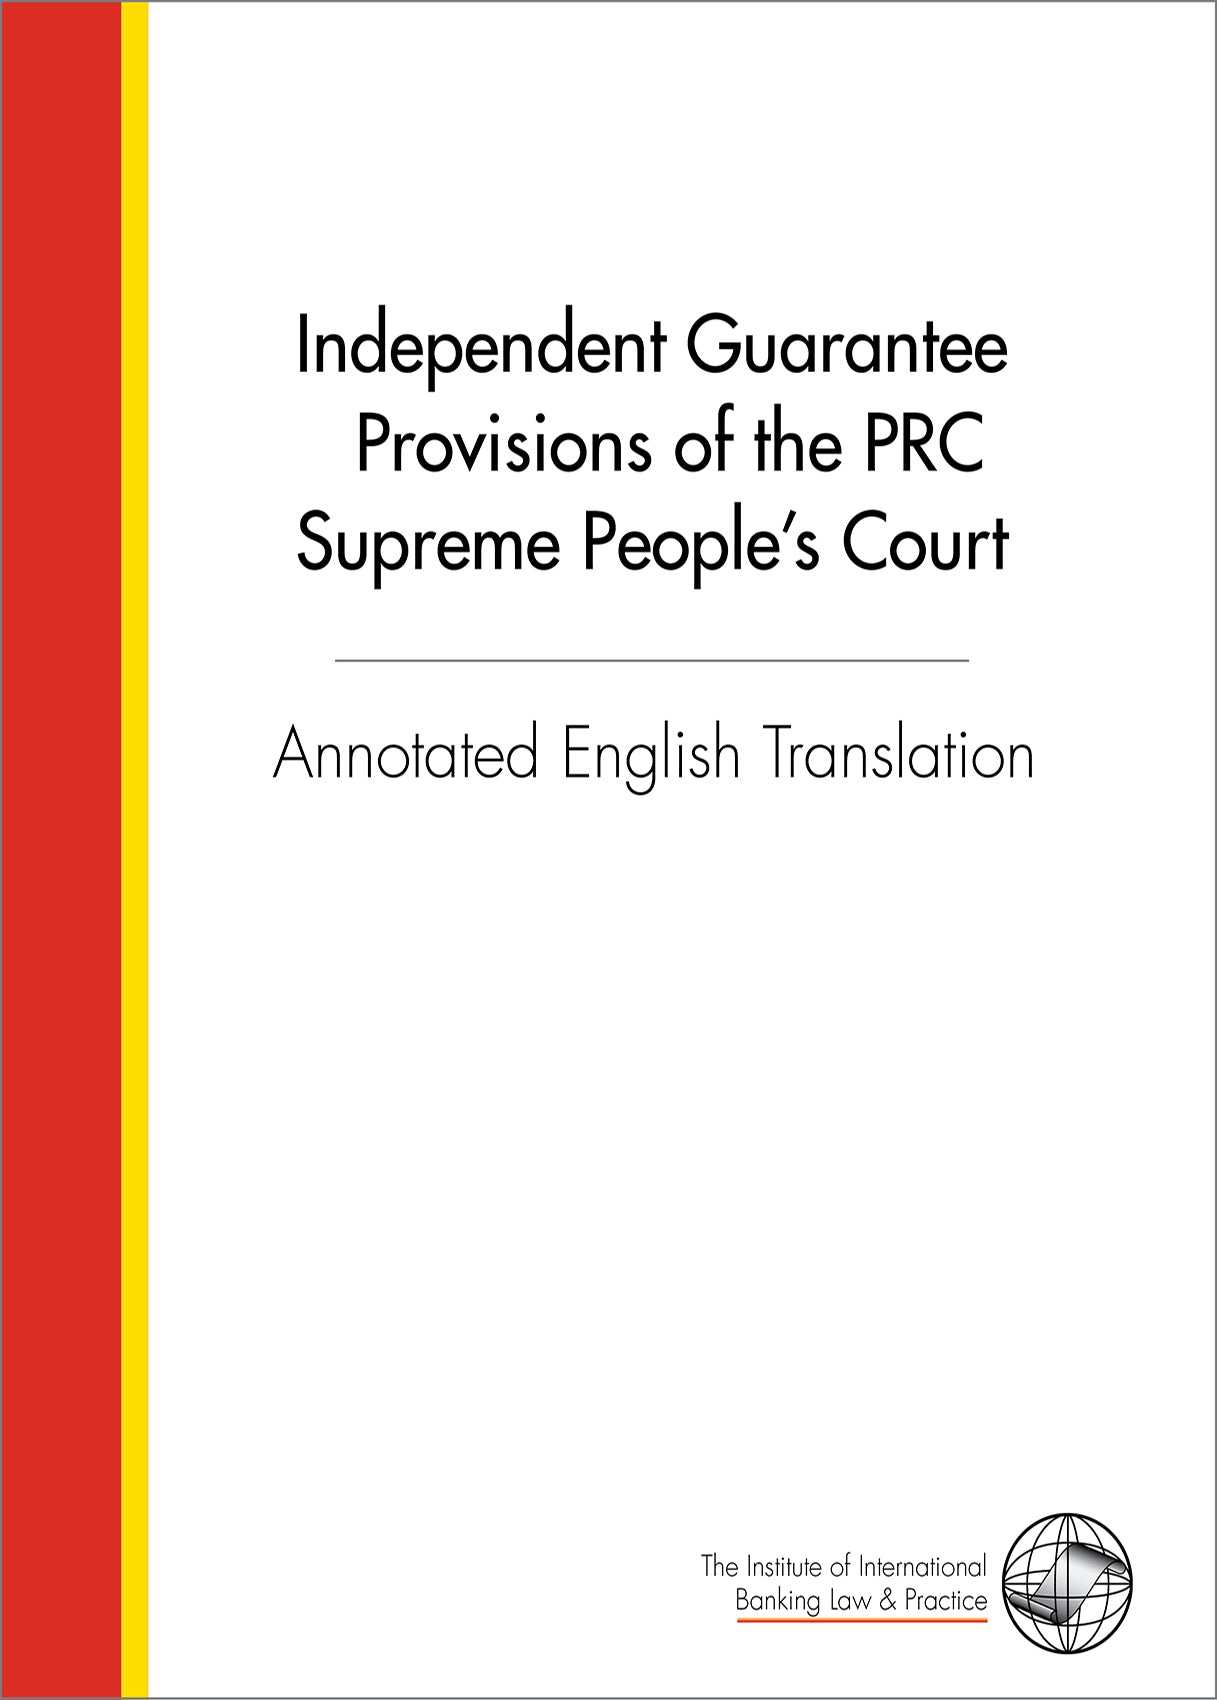 Annotated English Translation of the PRC Guarantee Provisions